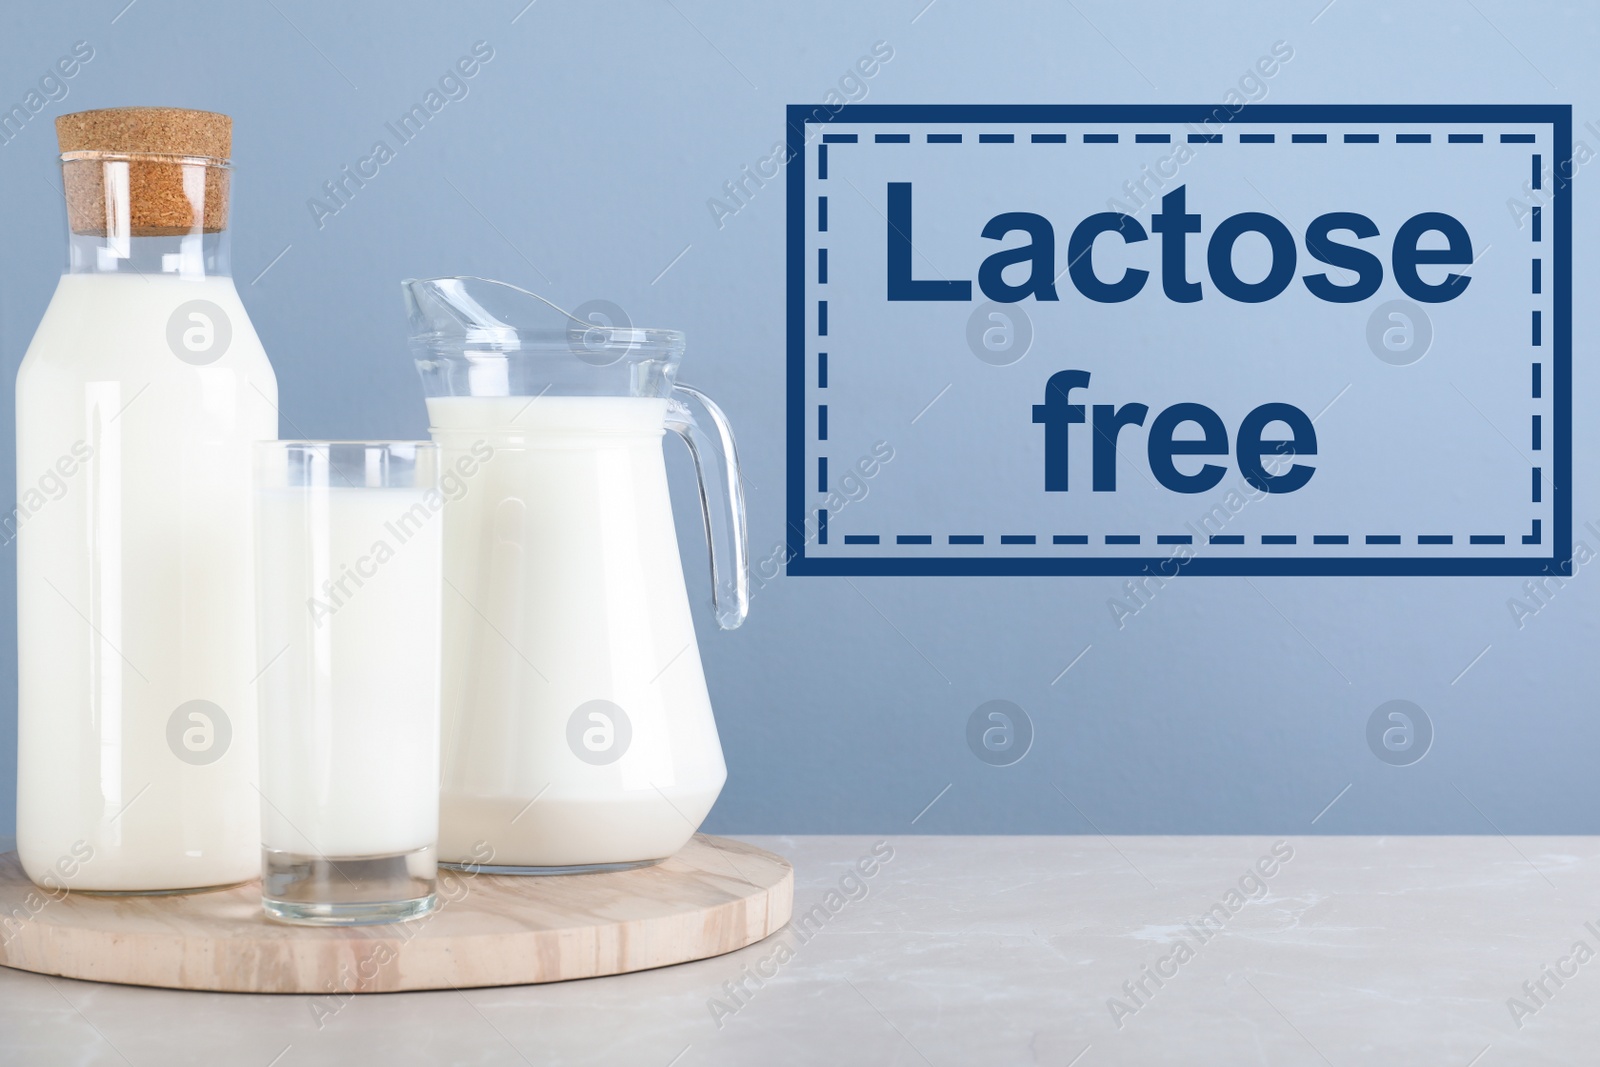 Image of Fresh lactose free milk on white table against light blue background